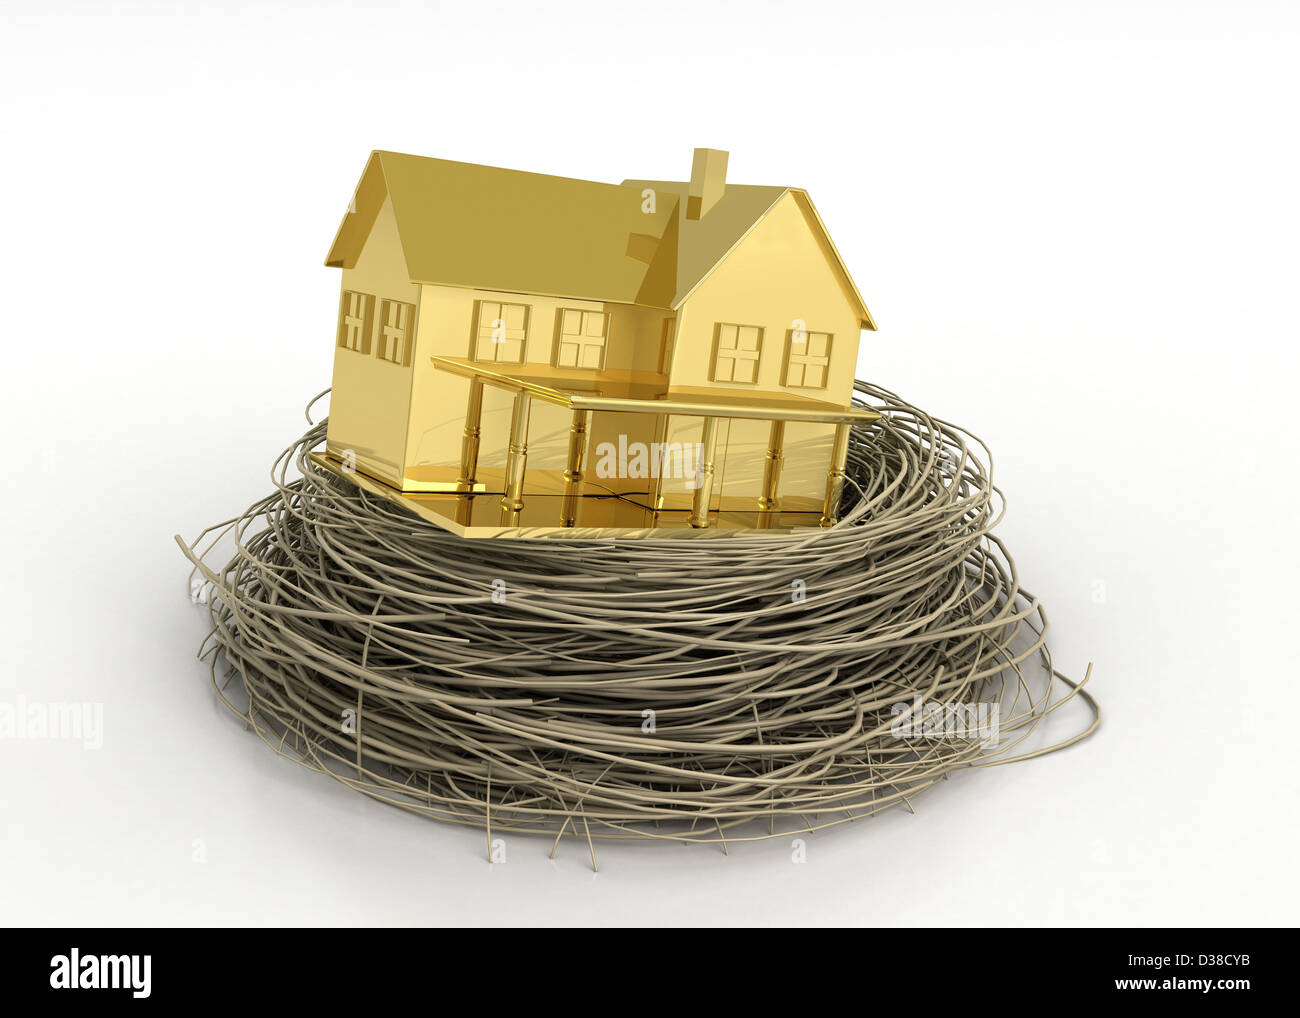 Illustrative image of gold house in bird's nest representing property profit Stock Photo